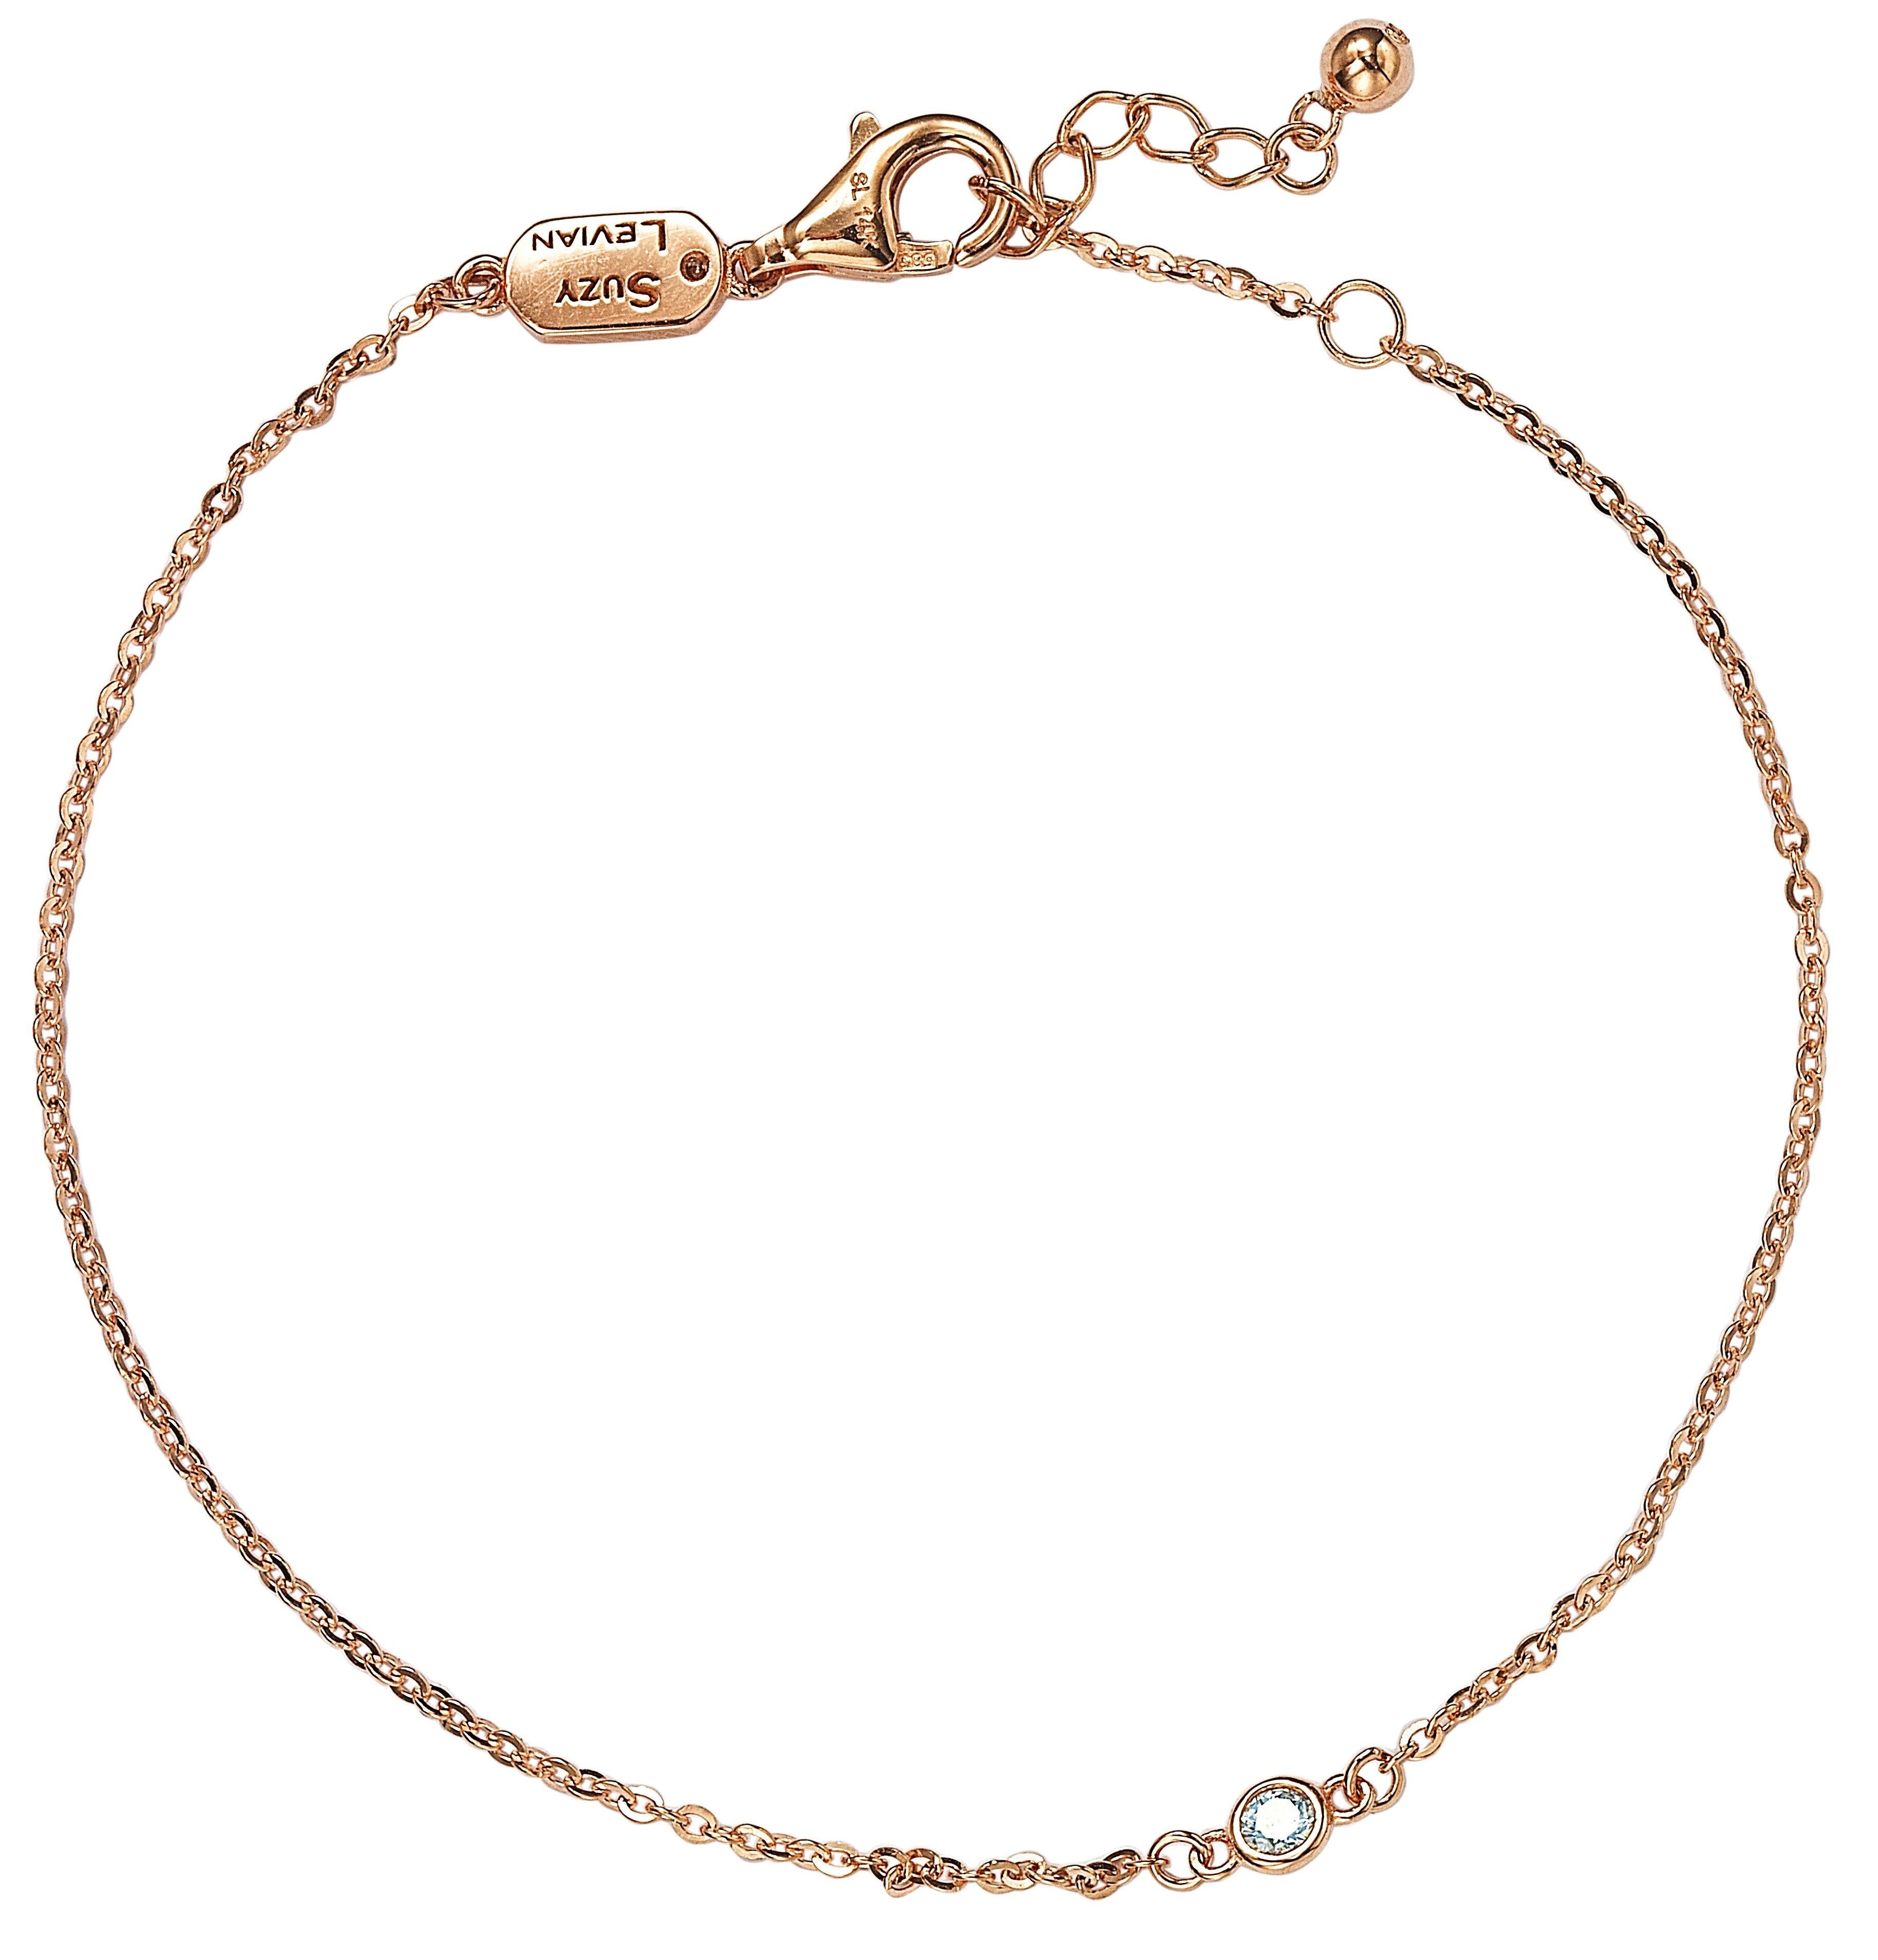 Add some sparkle to your wrist with this beautiful diamond solitaire bracelet by Suzy Levian. This magnificent bracelet boasts a brilliant round-cut diamond in an exquisite bezel adorned of 14-karat rose gold. This bracelet features a high polish